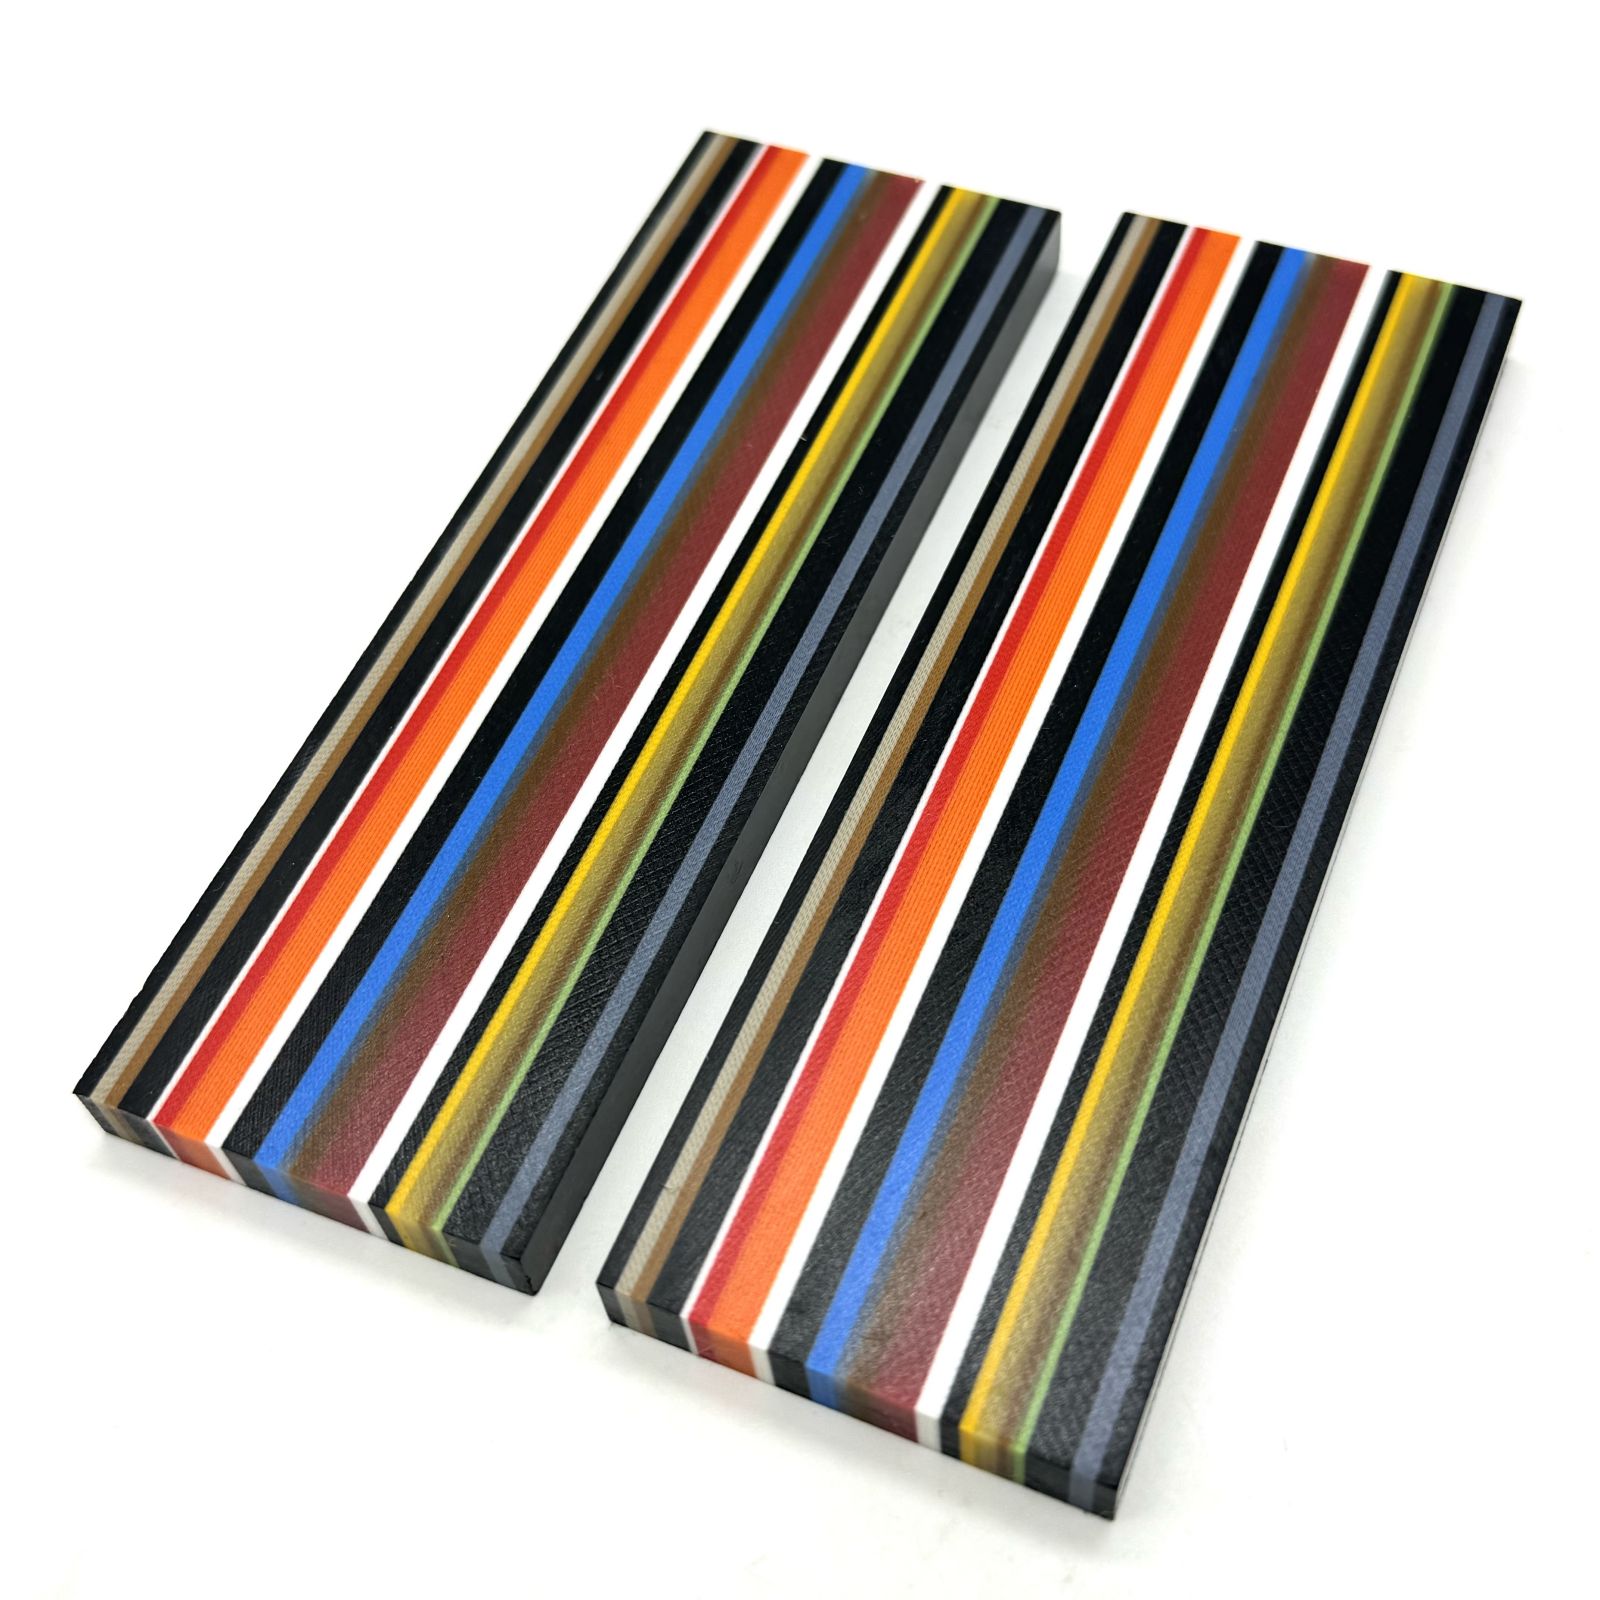 Multi color stripes G10 Knife Scales - Knife Handle Making Material